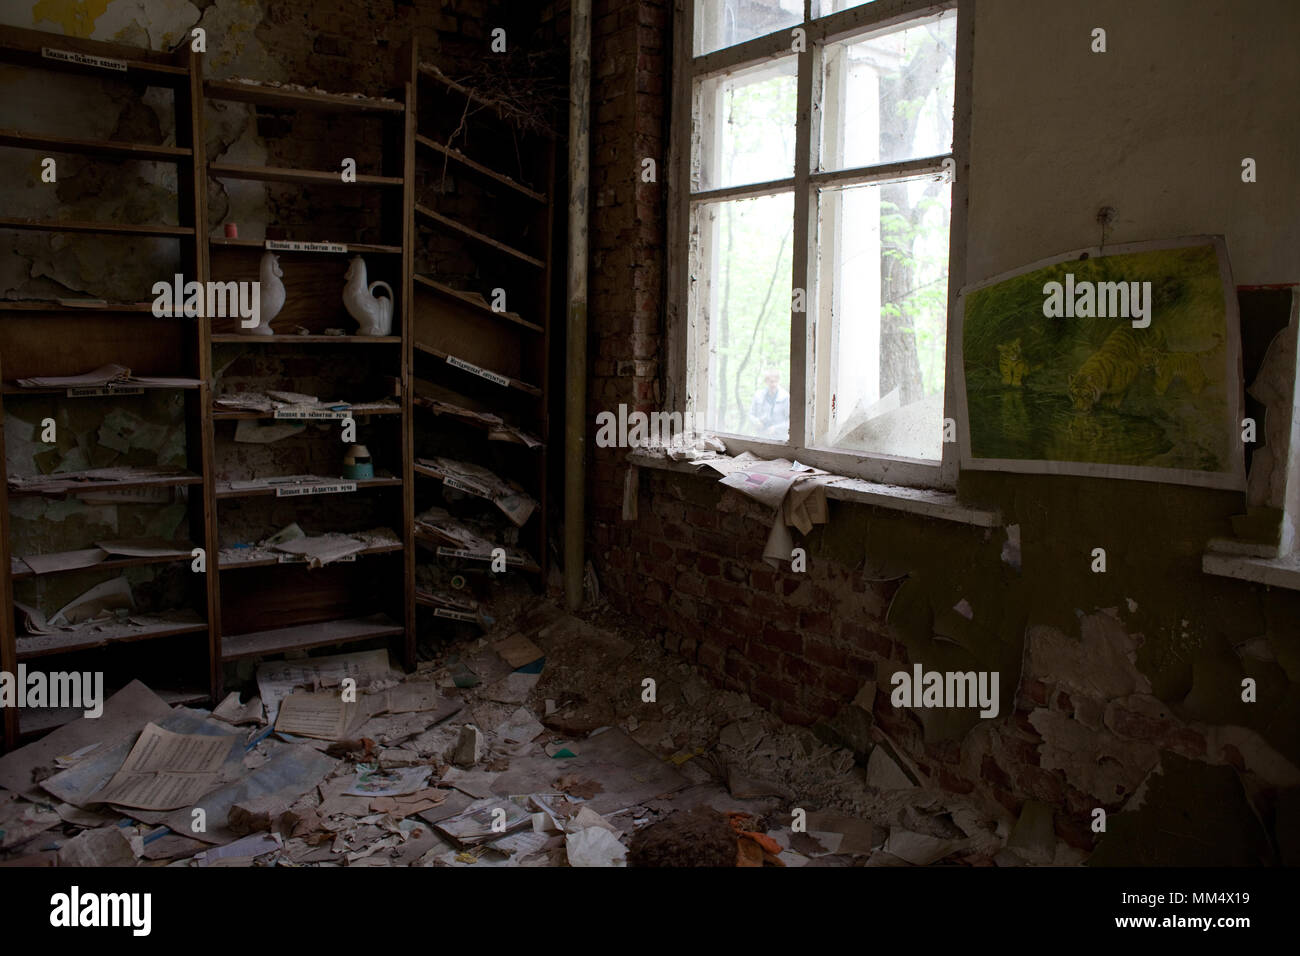 Ruined buildings and rooms, broken shelves, glass, Chernobyl 30km Exclusion Zone, northern Ukraine Stock Photo